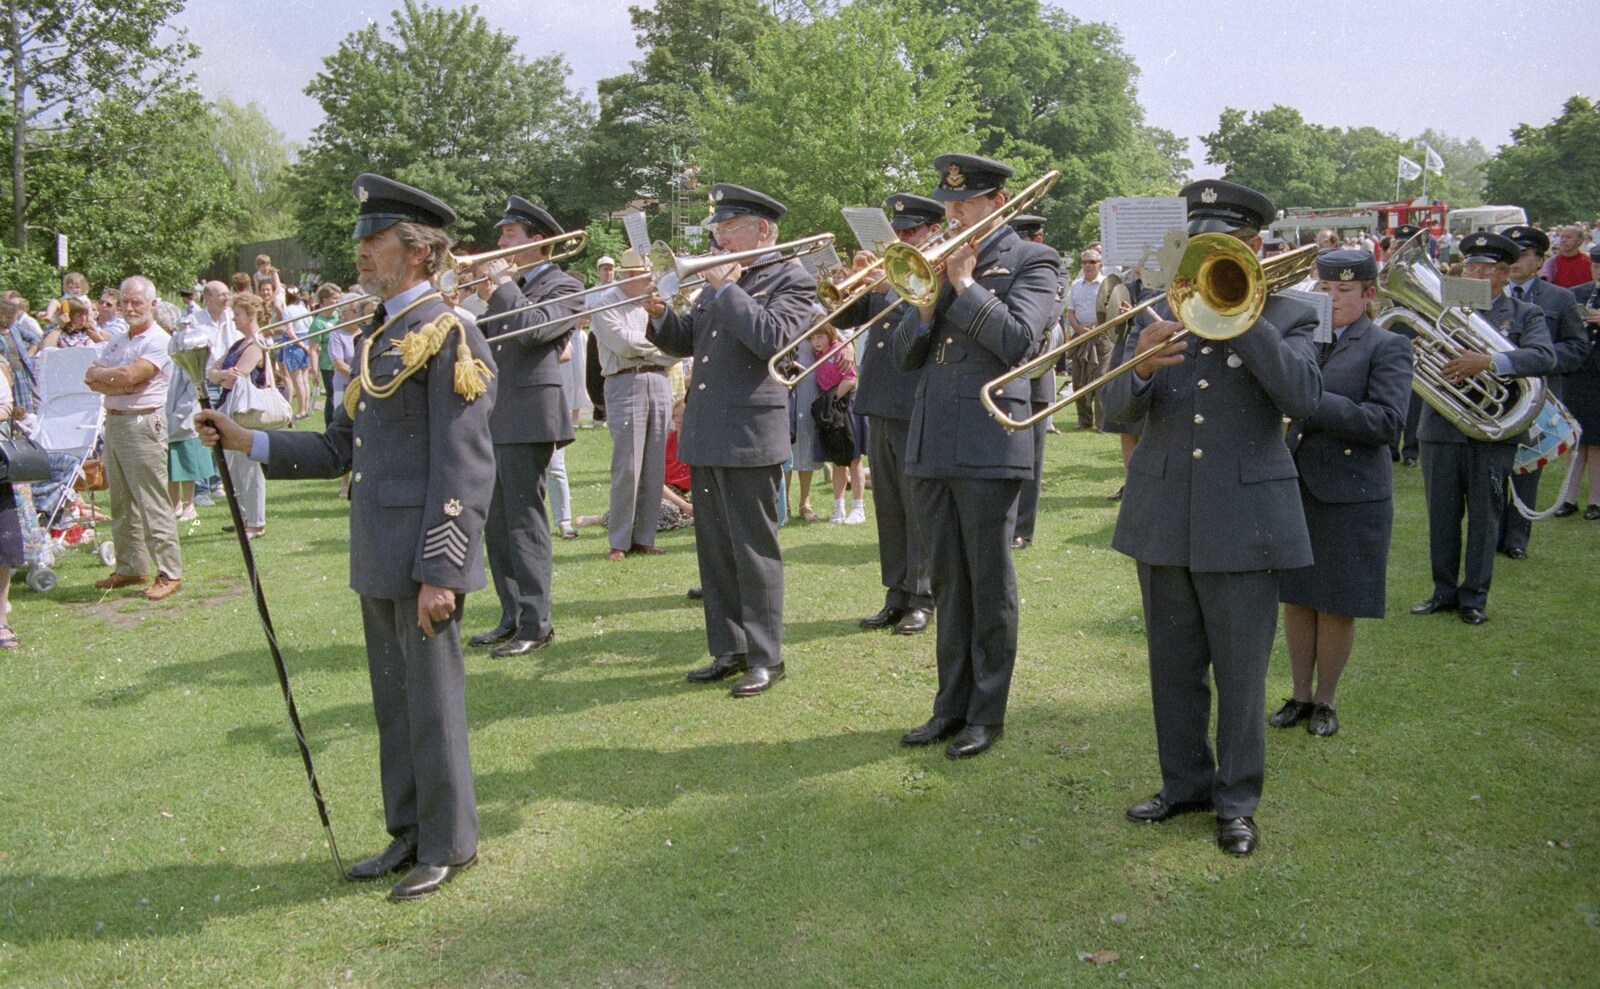 The RAF band in the park from A Raft Race on the Mere, Diss, Norfolk - 2nd June 1990